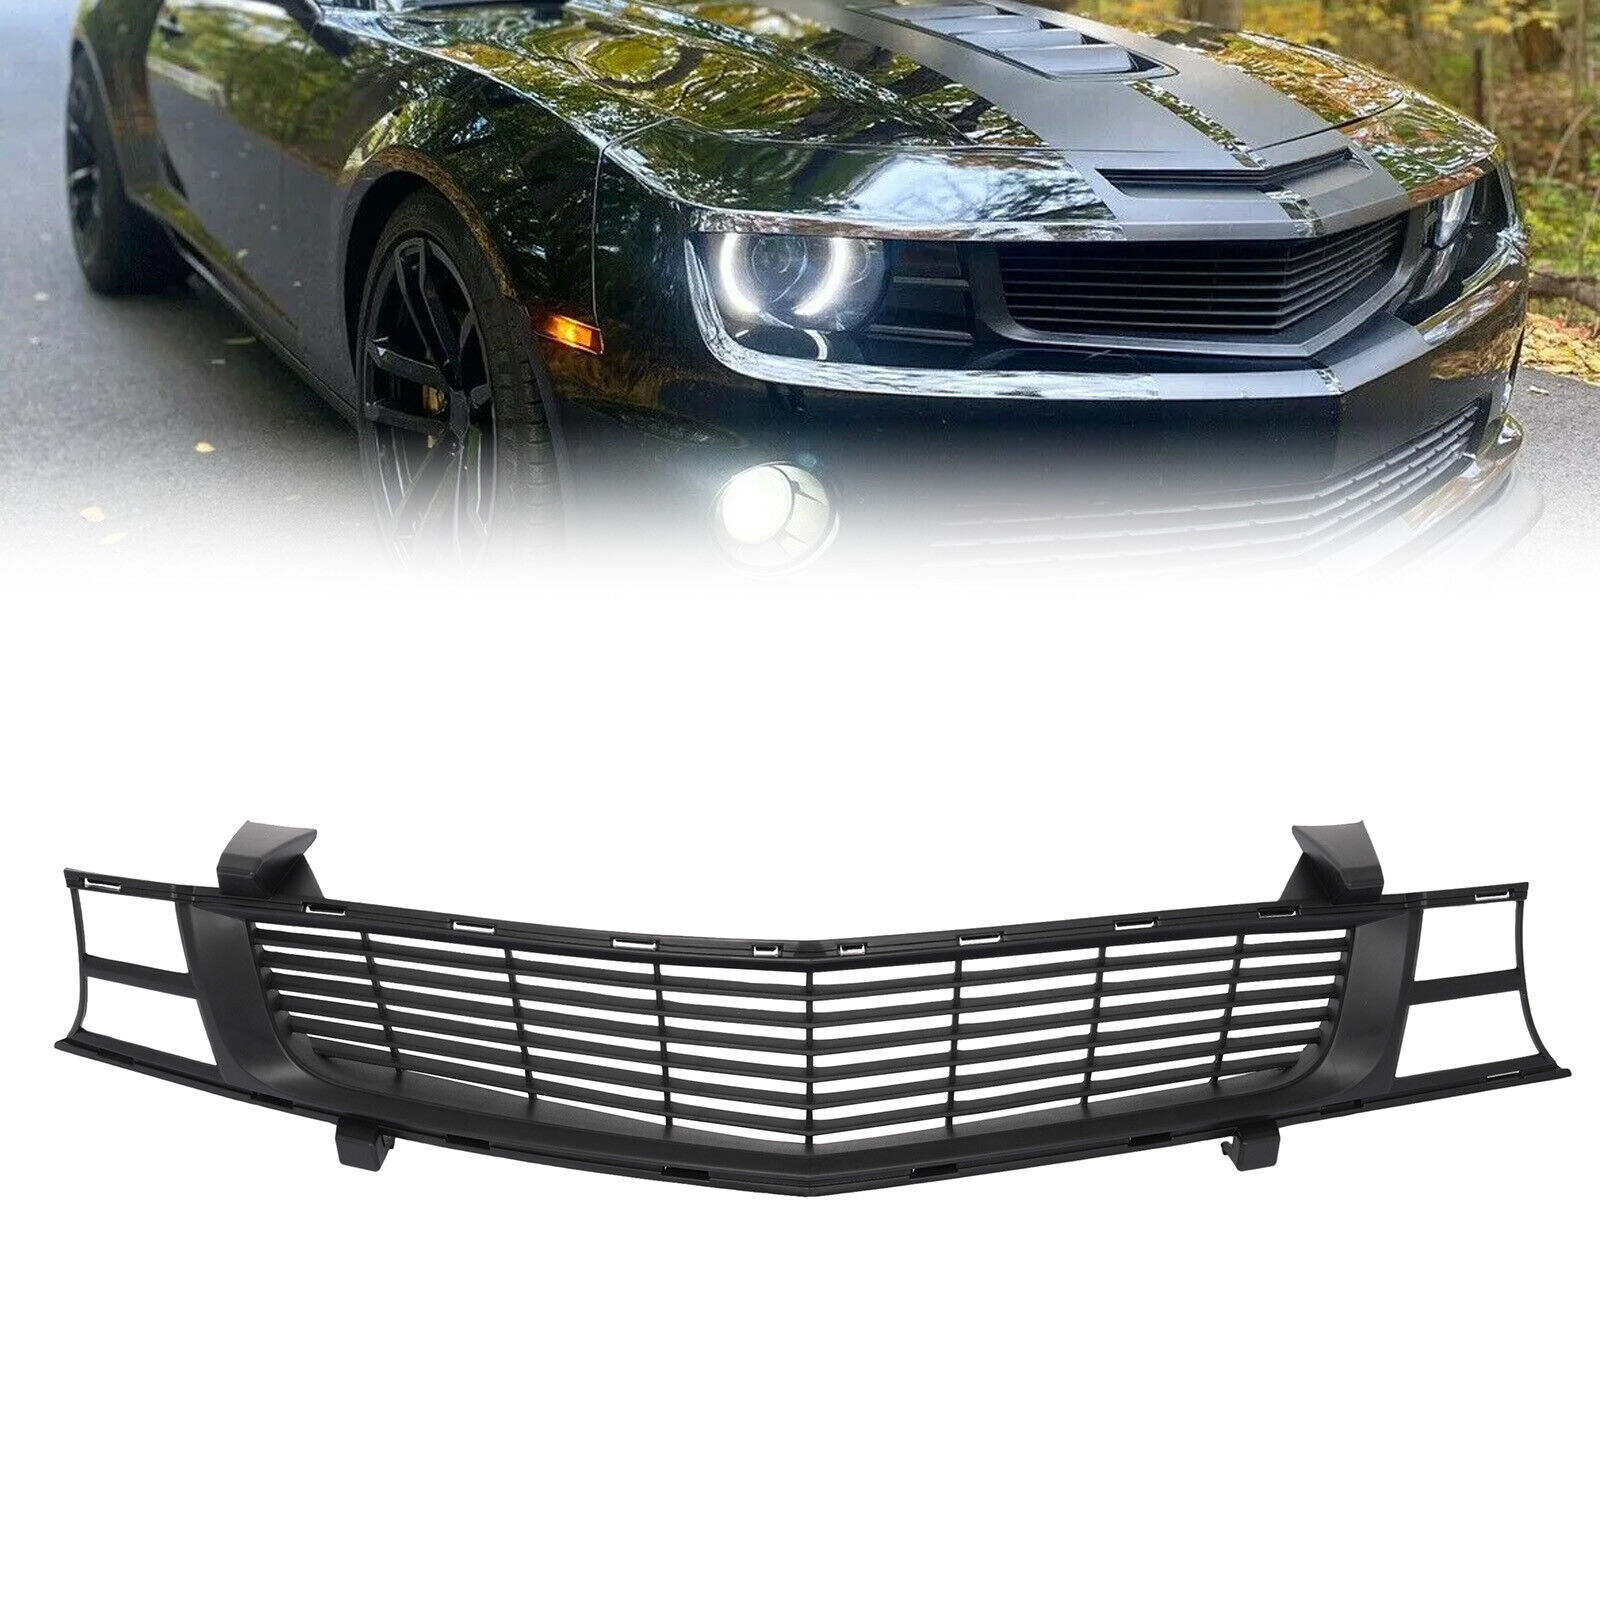 Black Heritage Upper Grille For 2010-13 Chevy Camaro ZL1 2012-15 #92208704